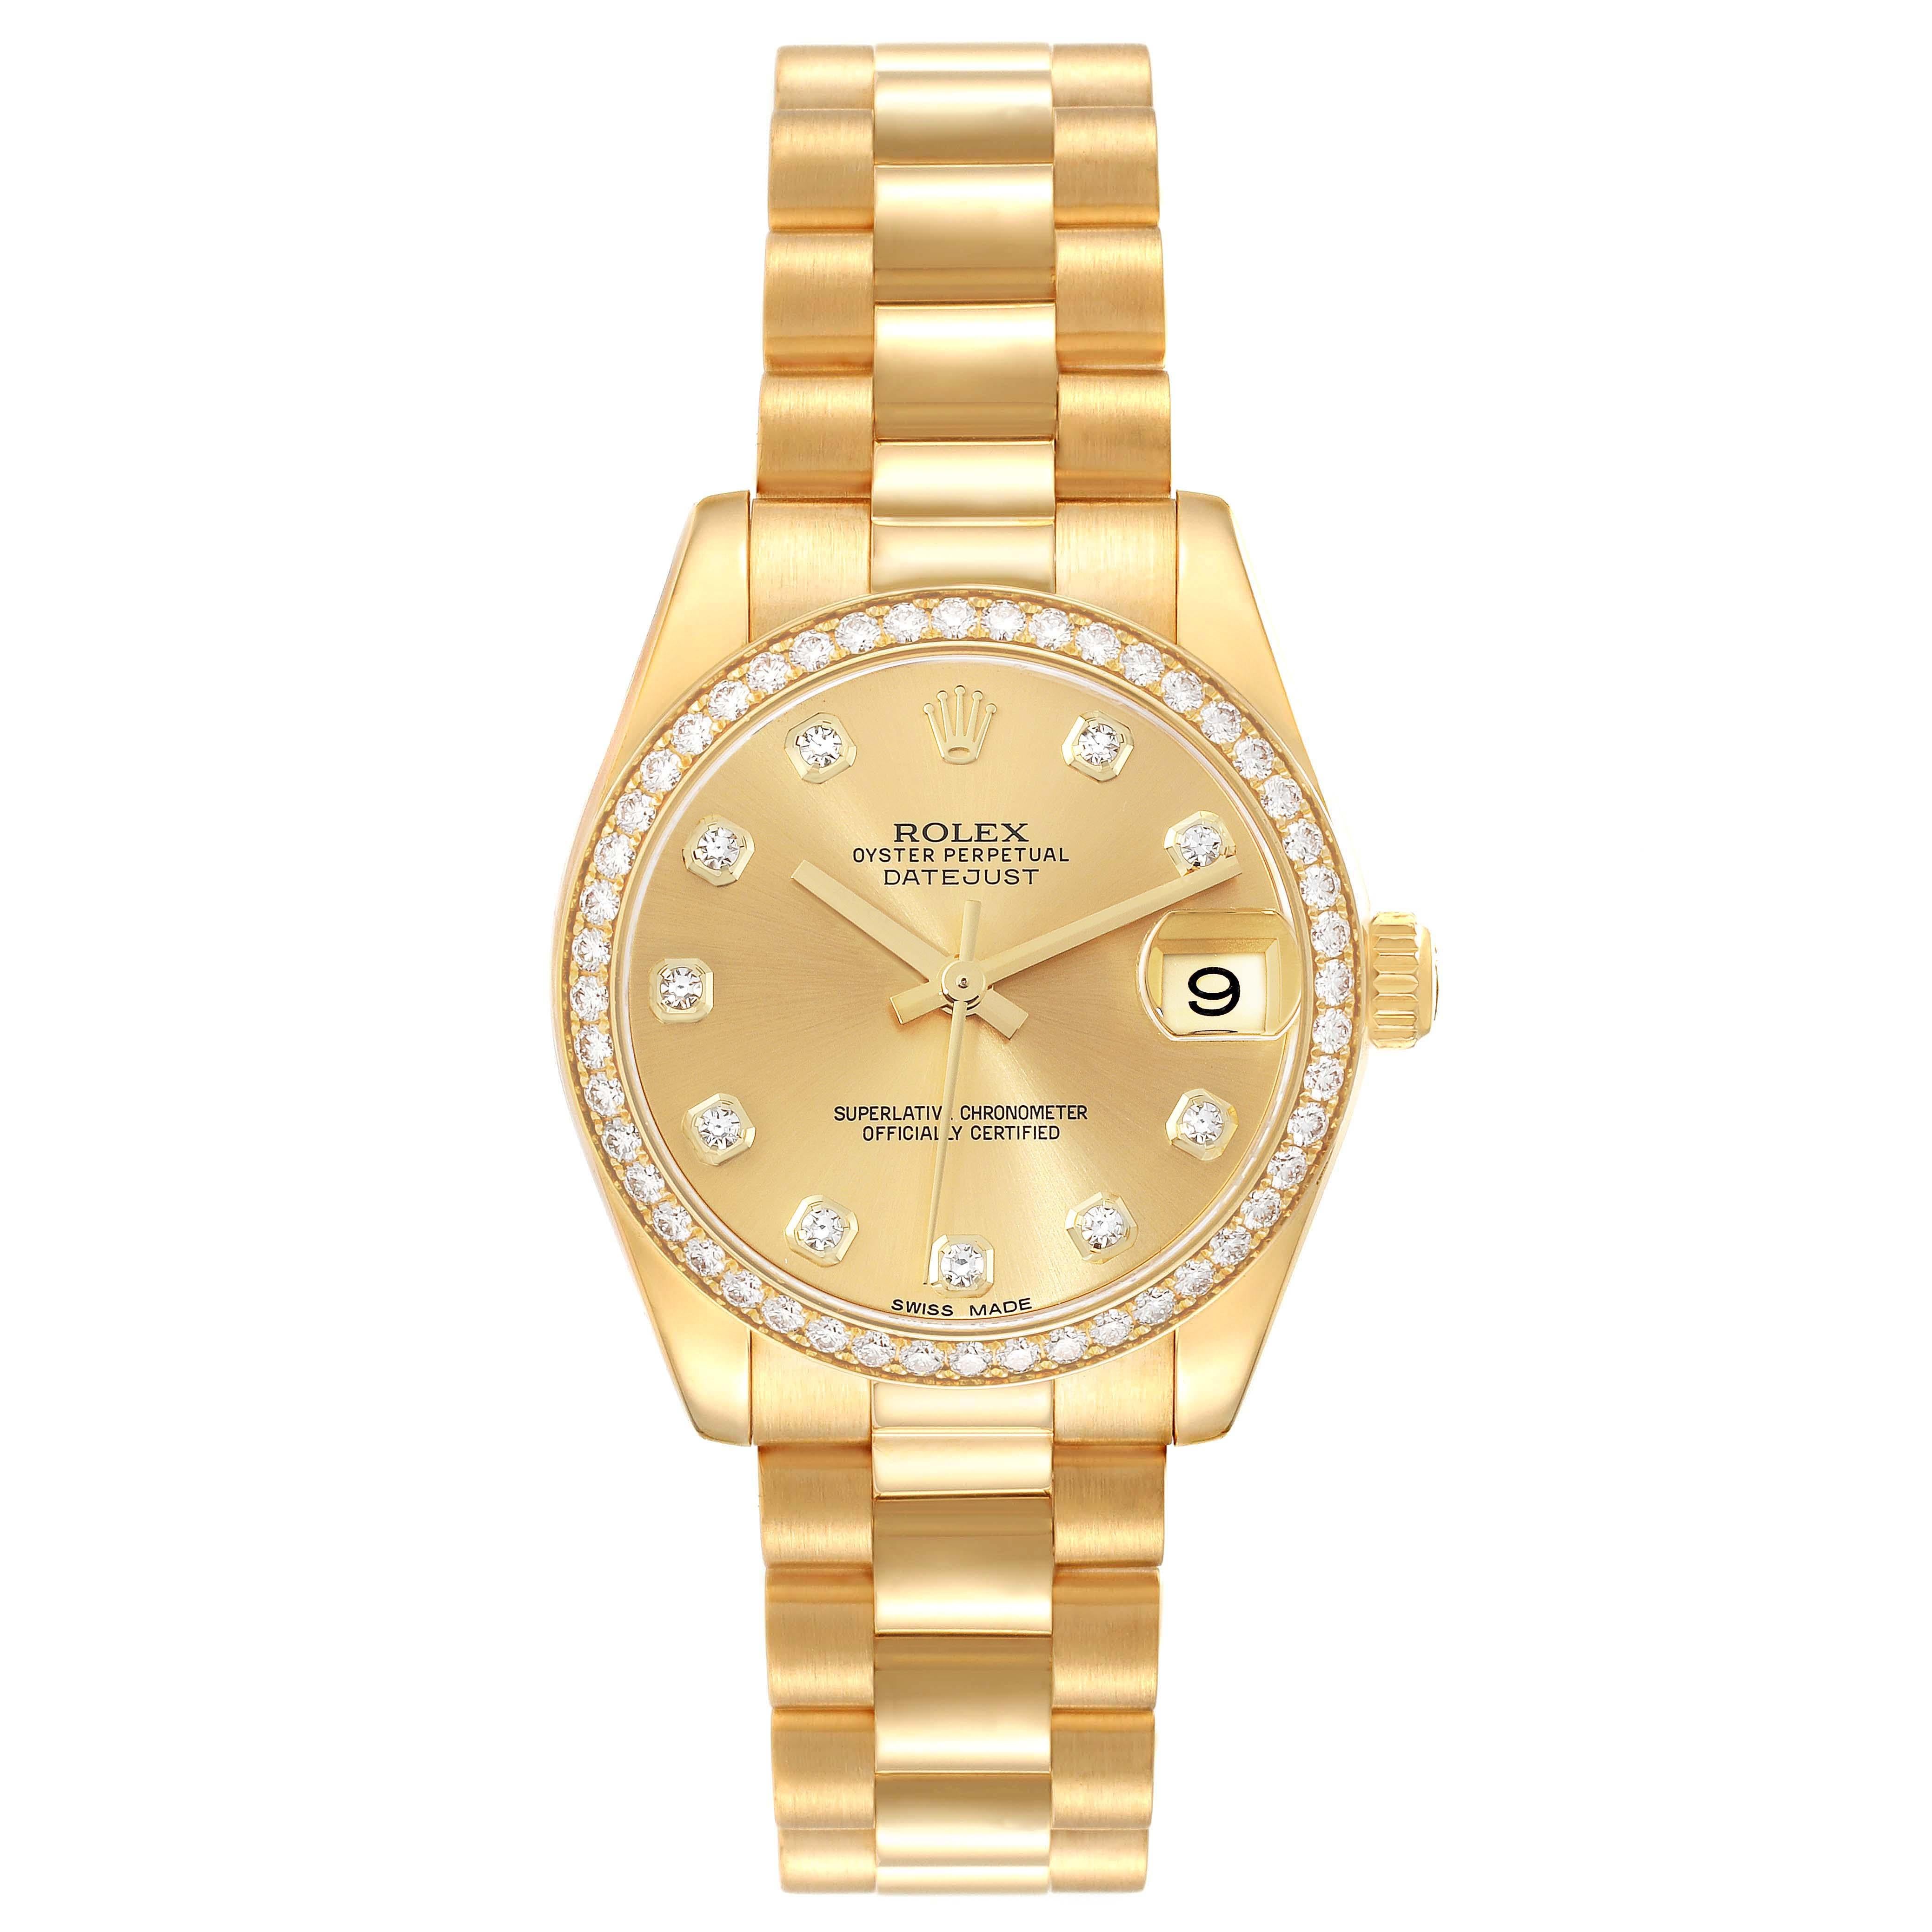 Rolex President 31 Midsize Yellow Gold Diamond Ladies Watch 178288 Box Card. Officially certified chronometer automatic self-winding movement. 18k yellow gold oyster case 31.0 mm in diameter. Rolex logo on a crown. Original Rolex factory diamond